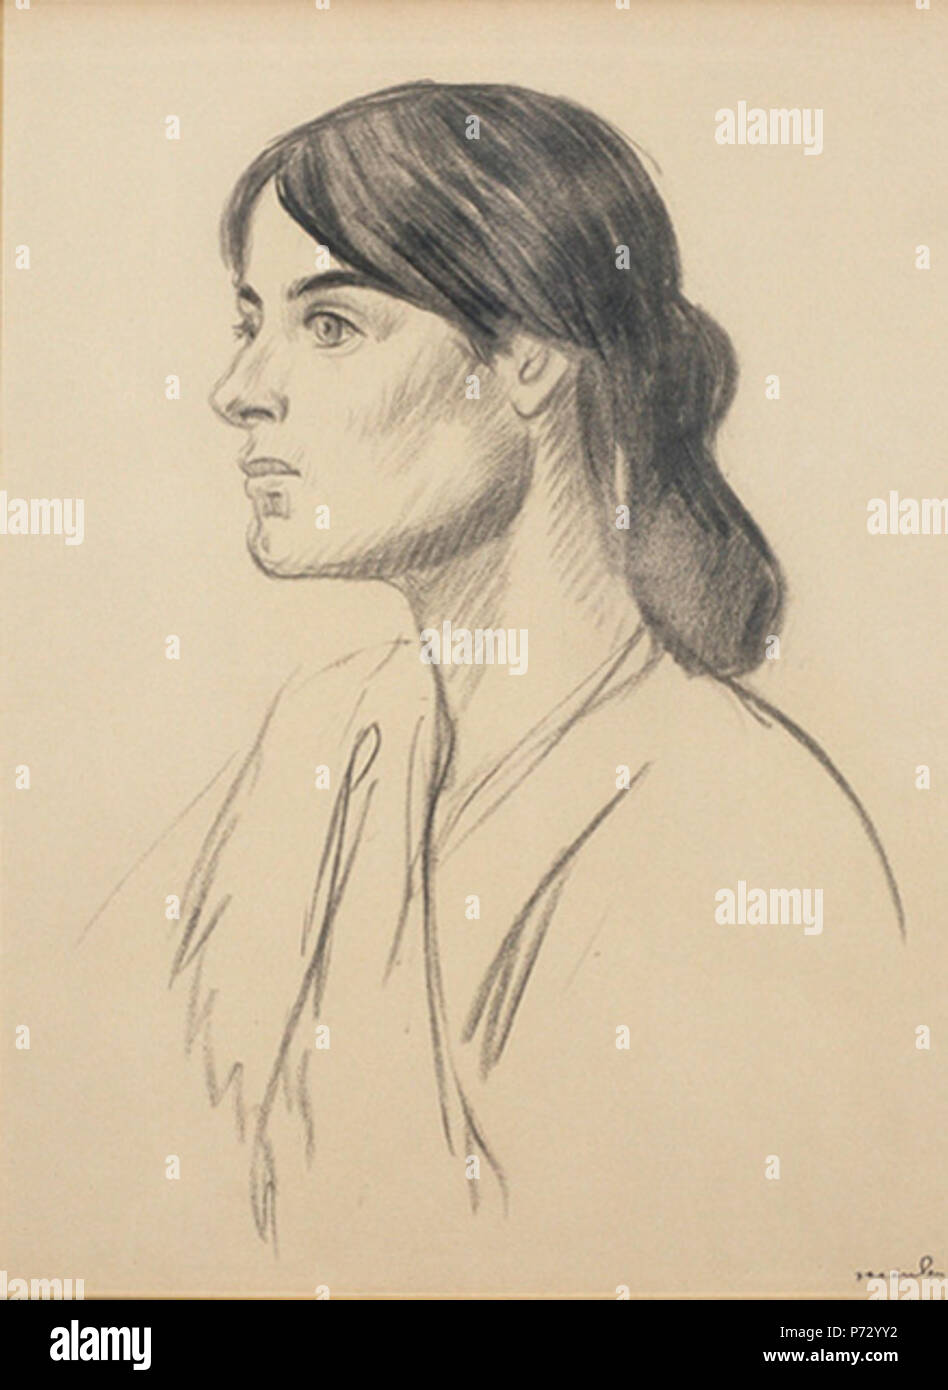 Portrait drawing of Suzanne Valadon by Théophile-Alexandre Steinlen (1859-1923). Gray crayon on beige paper, 62 x 46 cm. Not dated. From Valadon's age, probably 1880s to mid 1890s. 224 Valadon by Steinlen Stock Photo